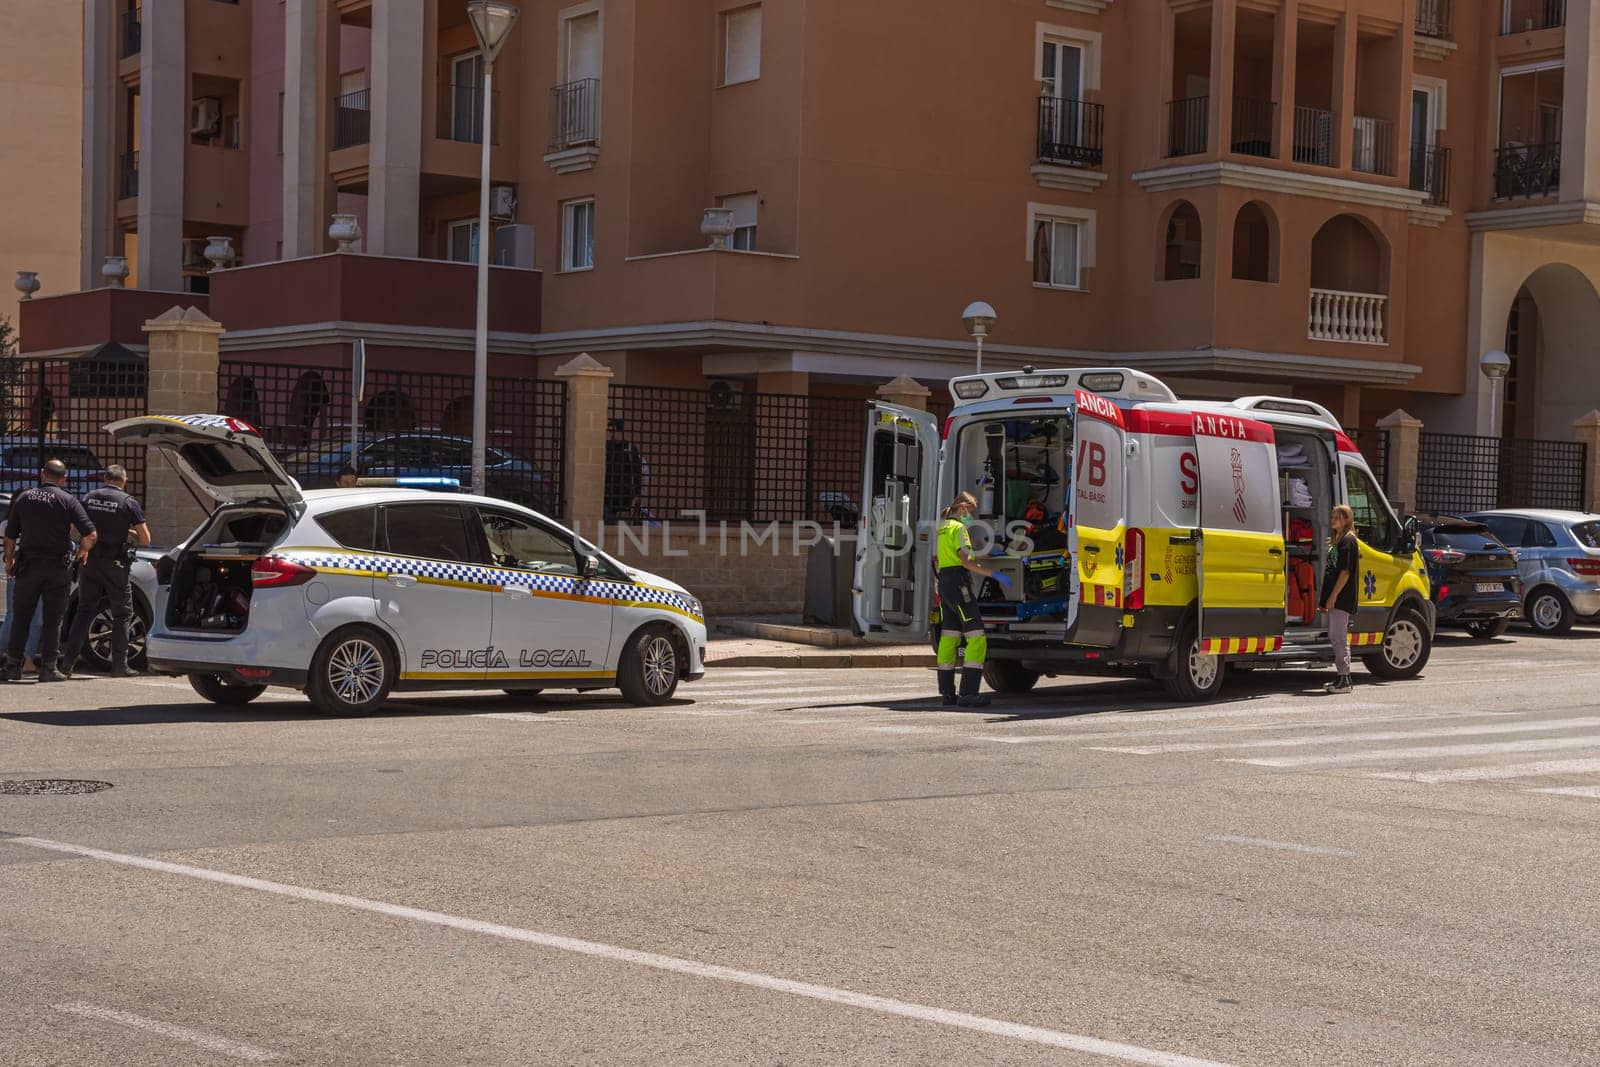 knocked down a man in the city on the road, Spain, Torrevieja on May 28, 2023, an ambulance on the road picks up a person injured. High quality photo